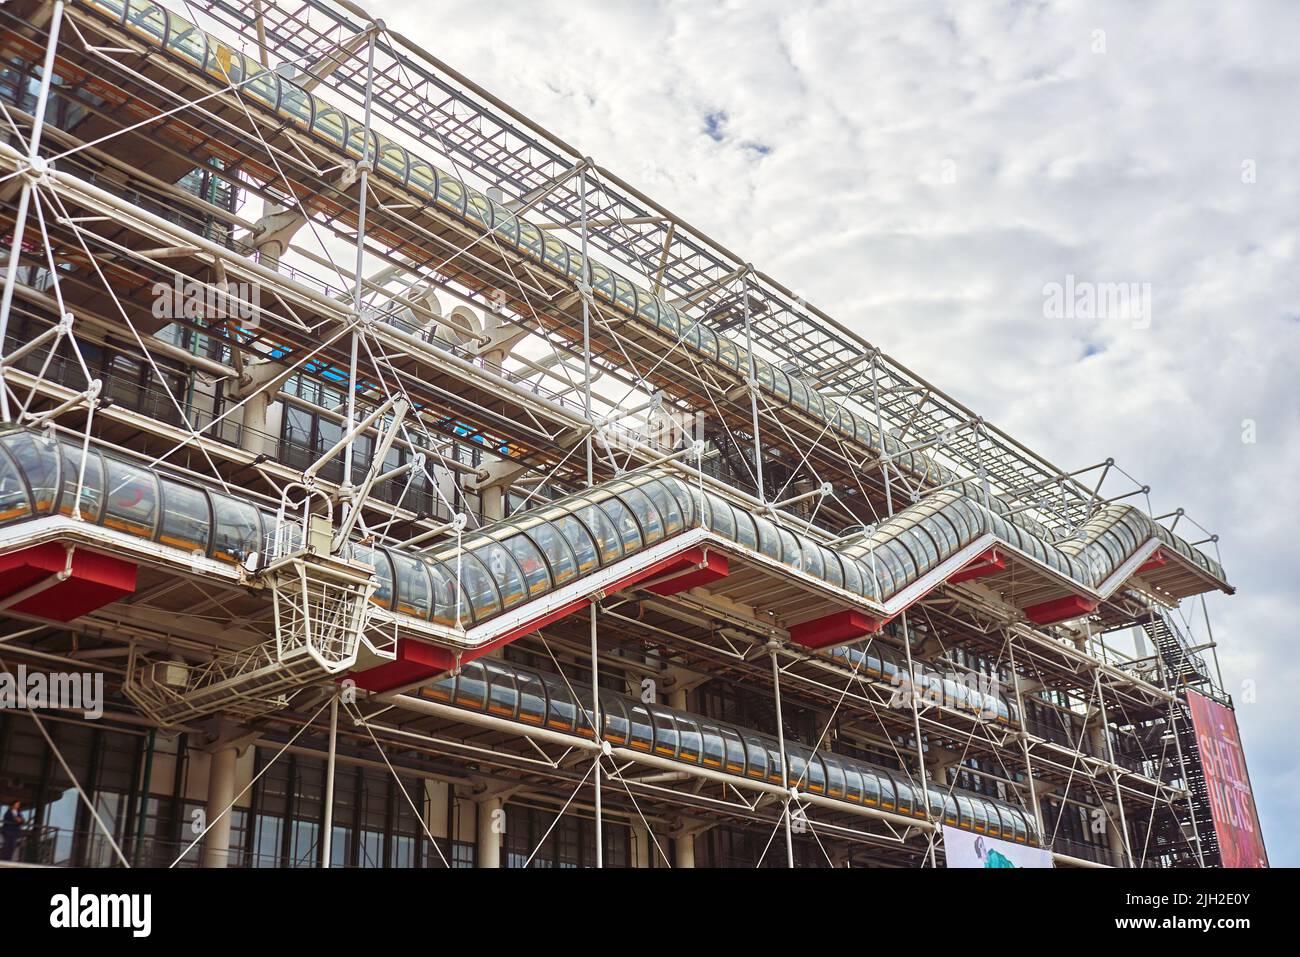 PARIS, FRANCE -APRIL 7, 2018: National Center for Art and Culture Georges Pompidou, in common speech Center Georges Pompidou, Center Pompidou or Beaub Stock Photo